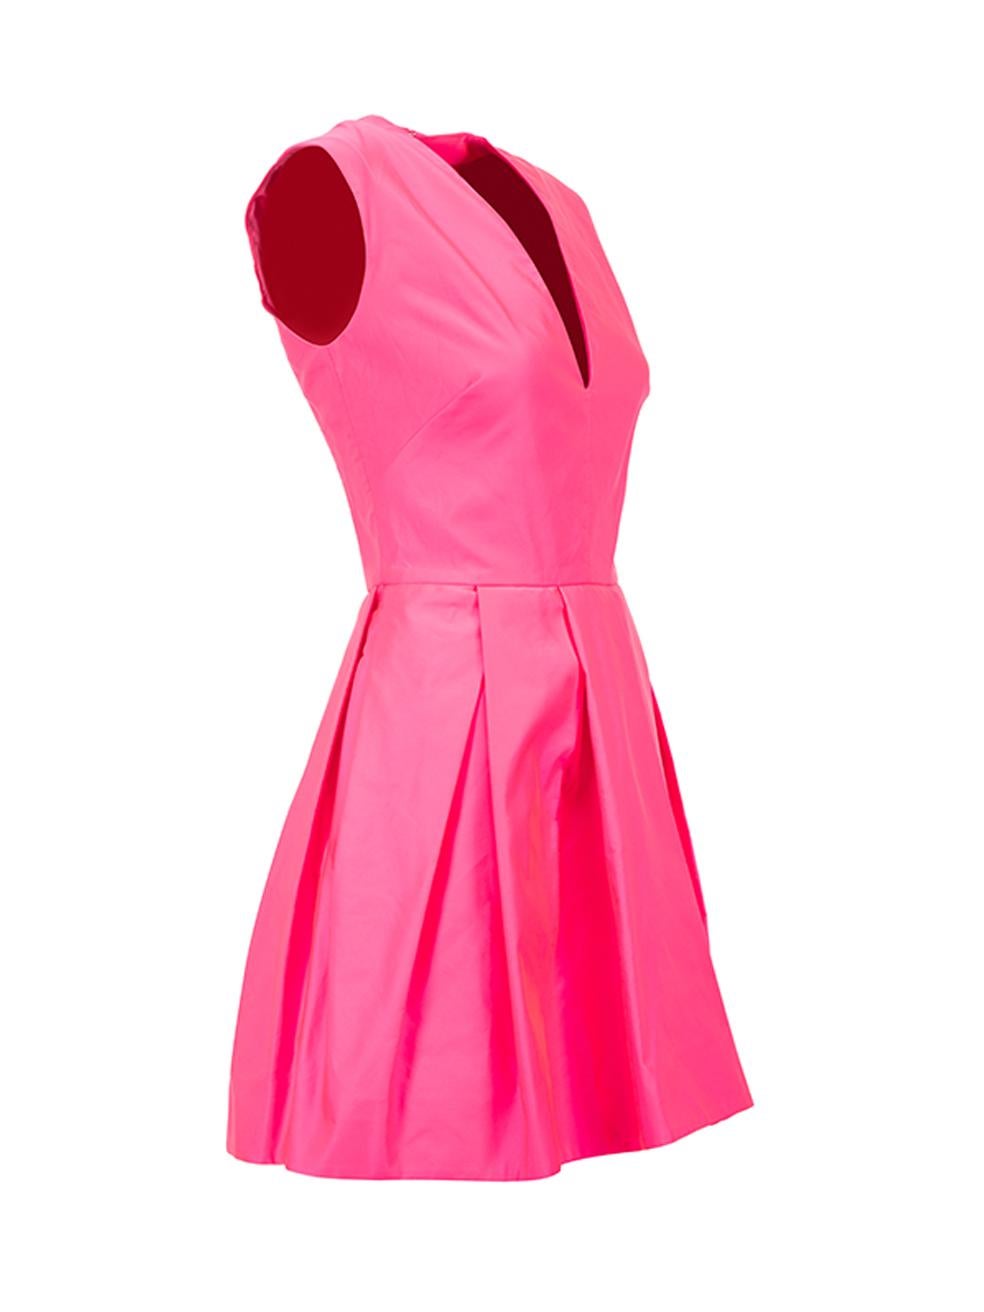 CONDITION is Very good. Hardly any visible wear to dess is evident on this used McQ designer resale item. 
 
 Details
  Pink
 Polyester
 Mini pleated dress
 V neckline
 Back zip closure with hook and eye
 
 
 Made in Italy
 
 Composition
 100%